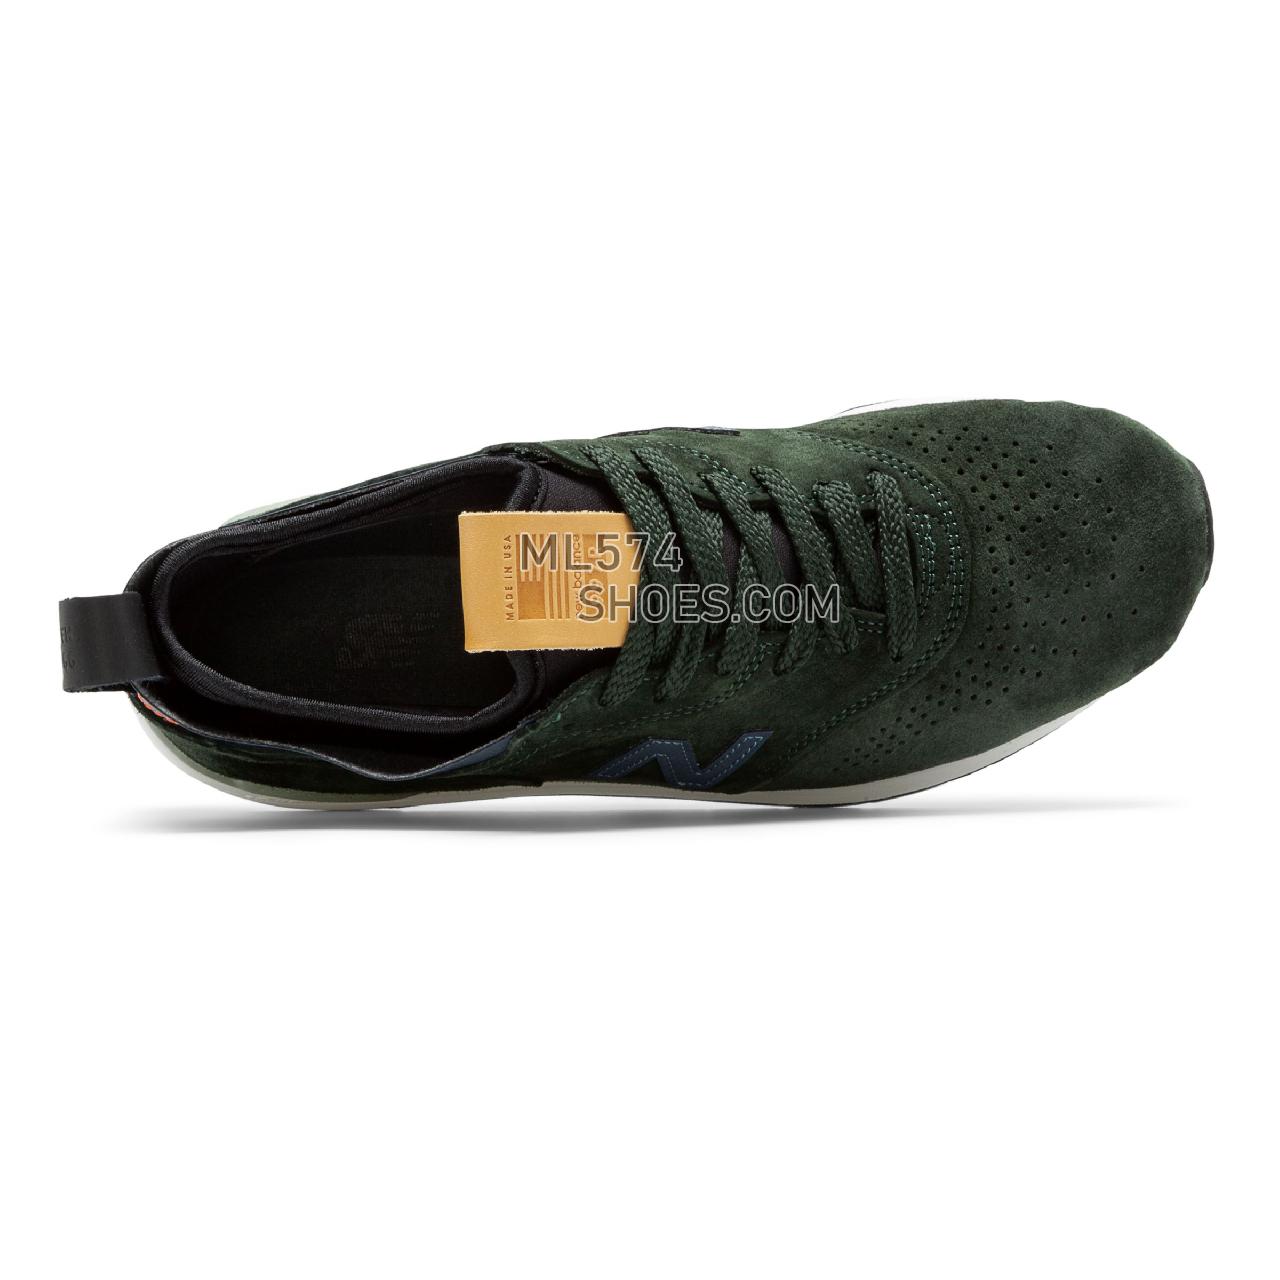 New Balance 997R - Men's 997 - Classic Green with Blue - M997HB2